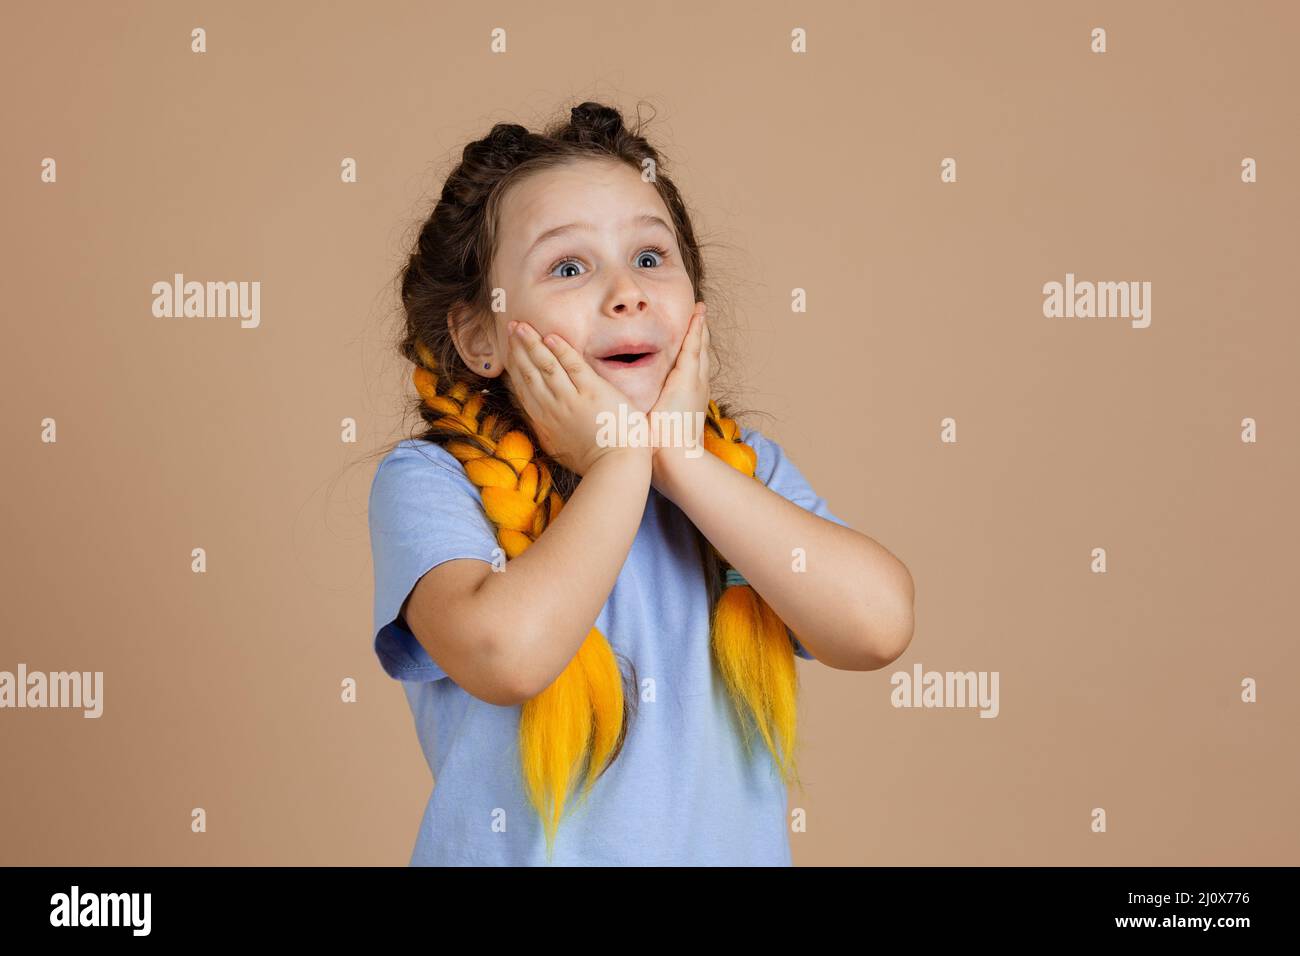 Surprised shocked girl touching face with hands looking up with shining eyes with yellow kanekalon braids on head on beige background wearing blue t Stock Photo